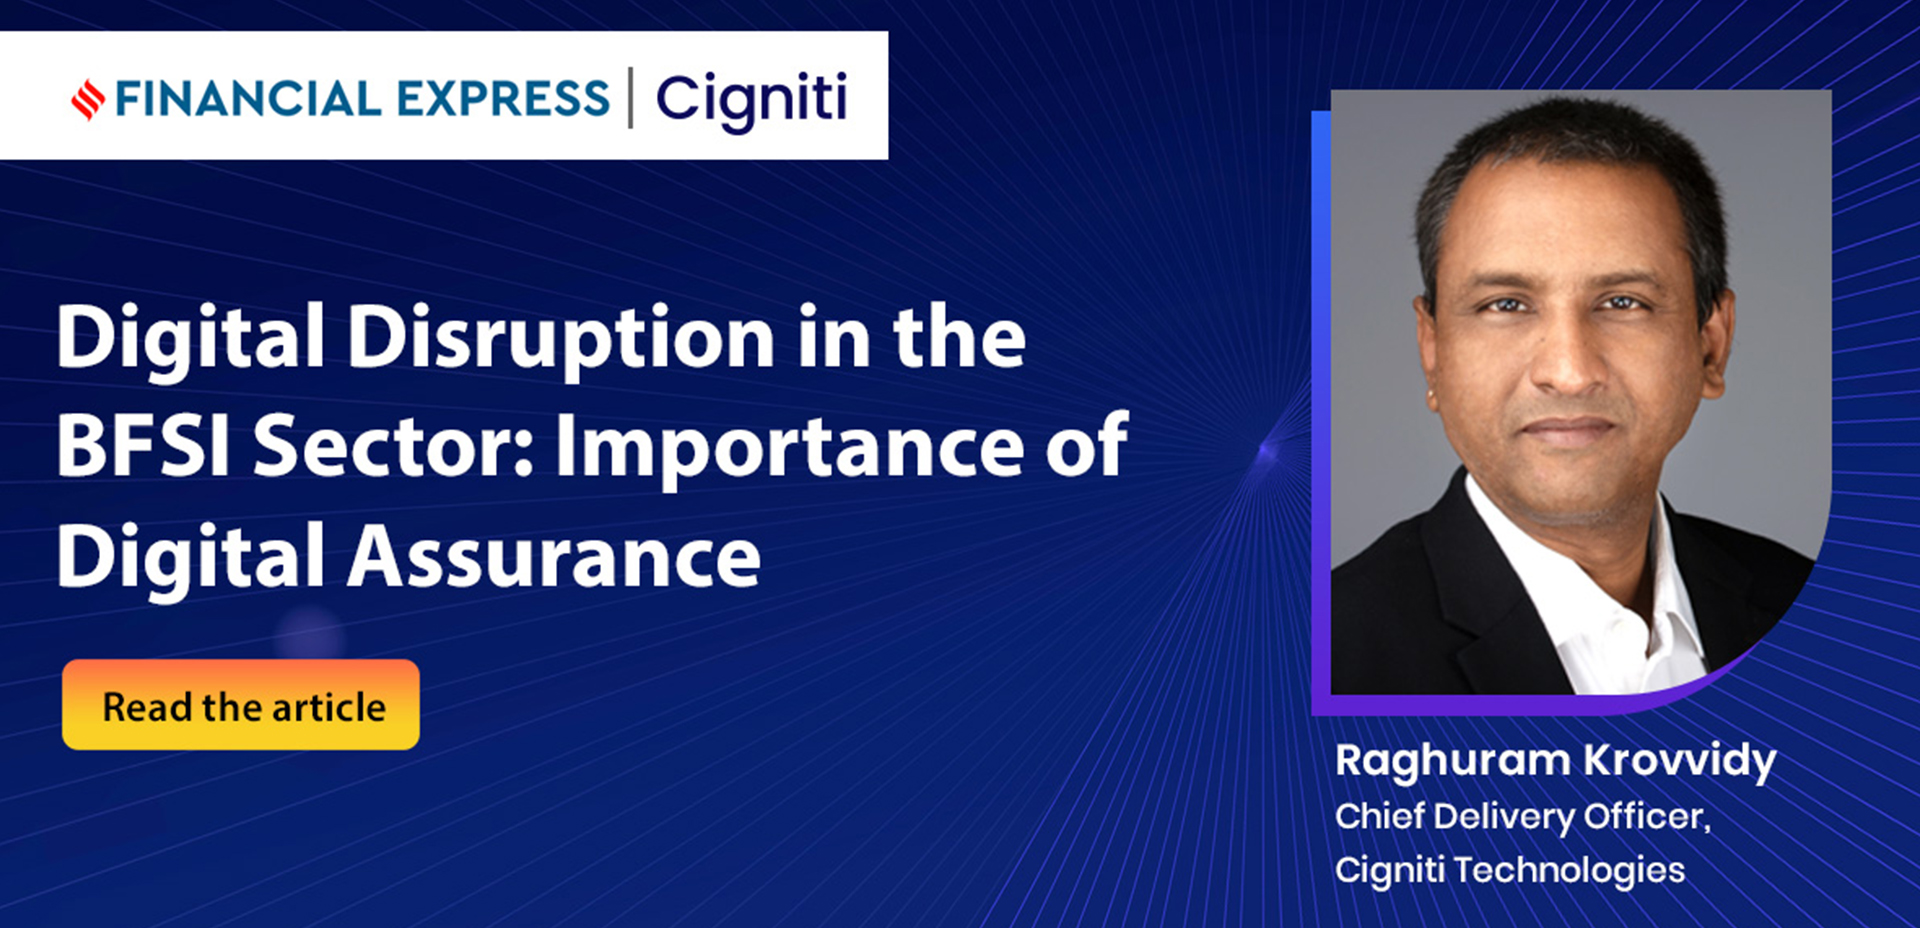 Cigniti's Digital Assurance Thought Leadership in BFSI Recognized by Financial Express